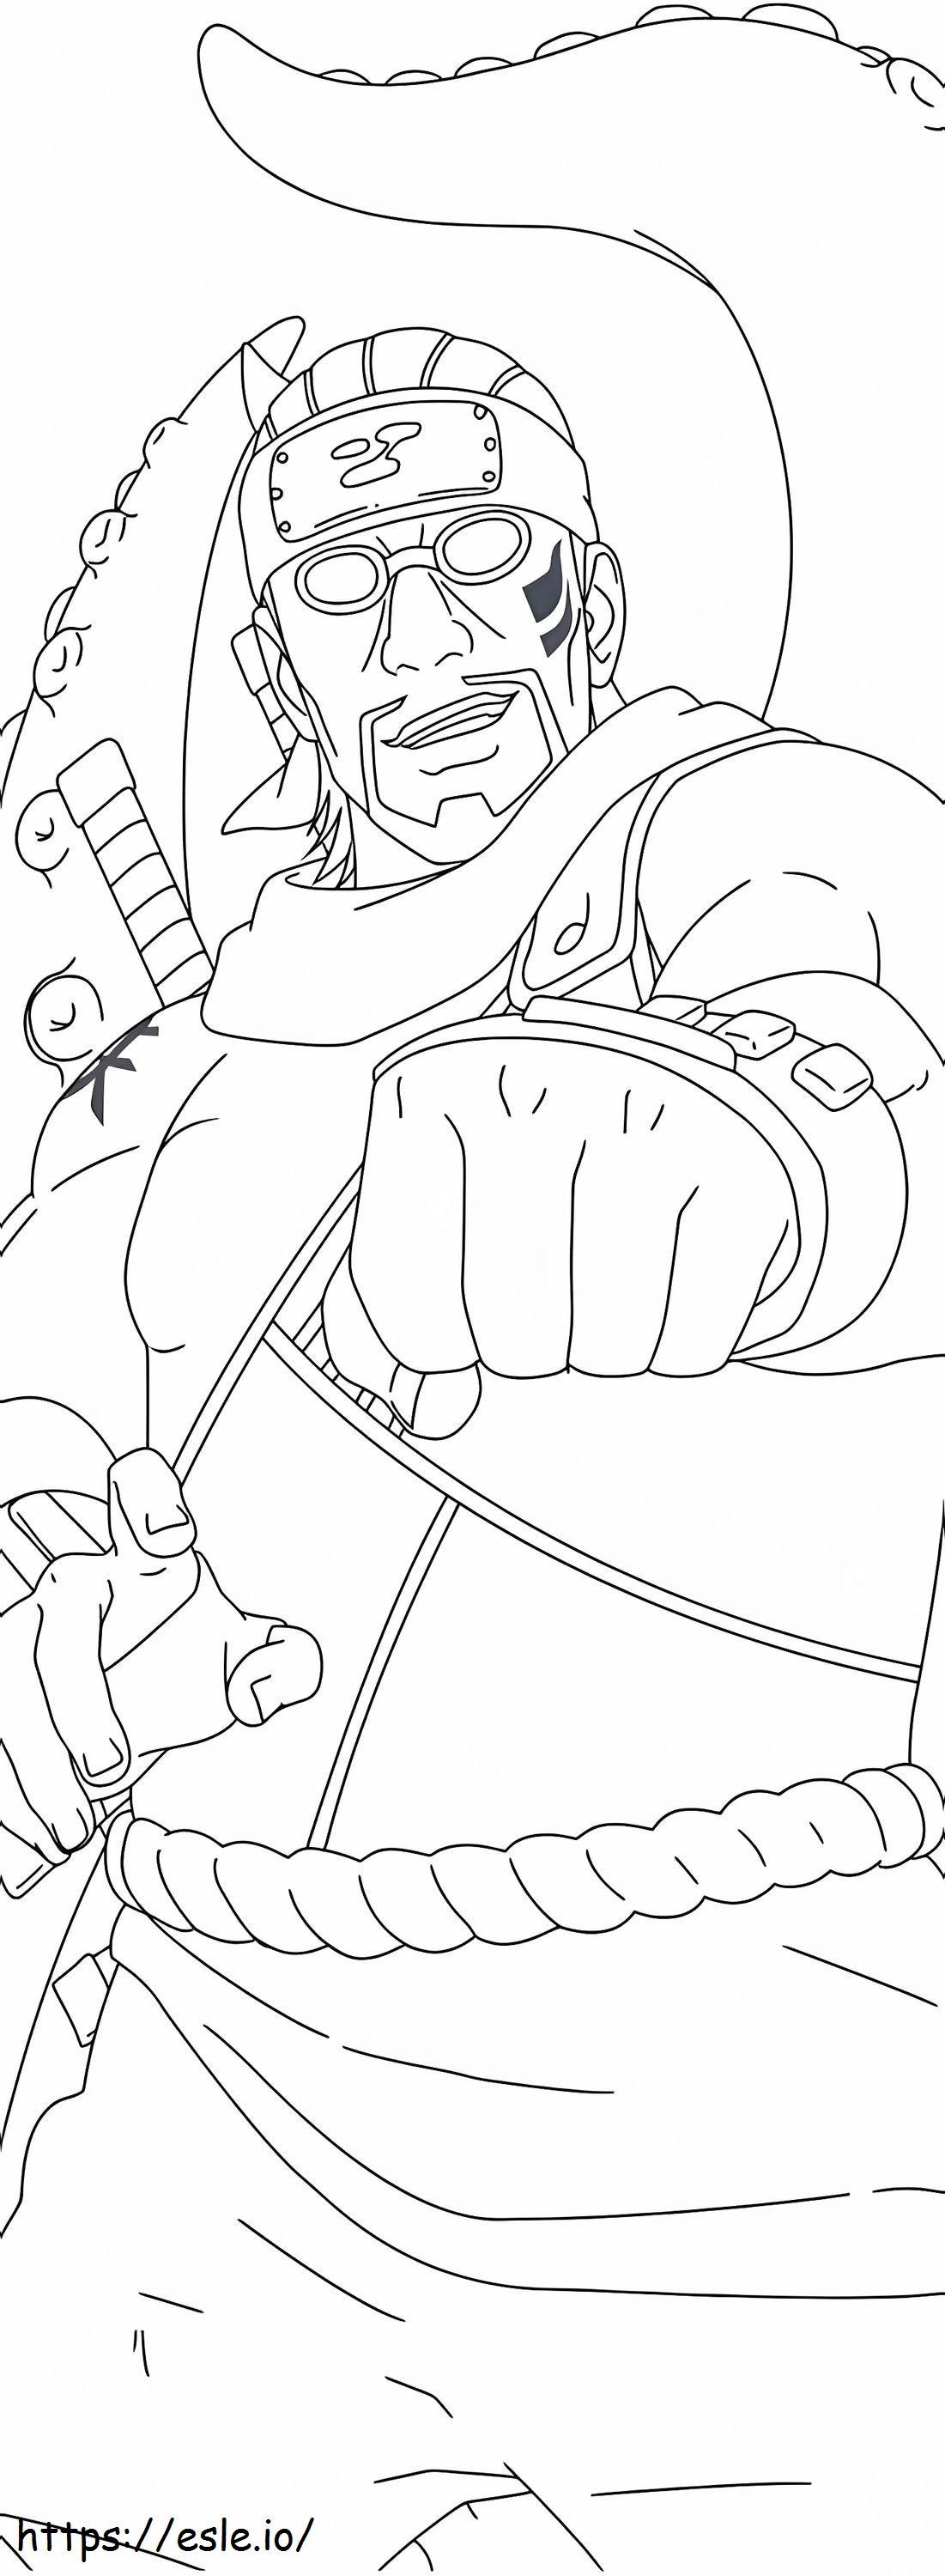 1561623174_Killer B A4 coloring page